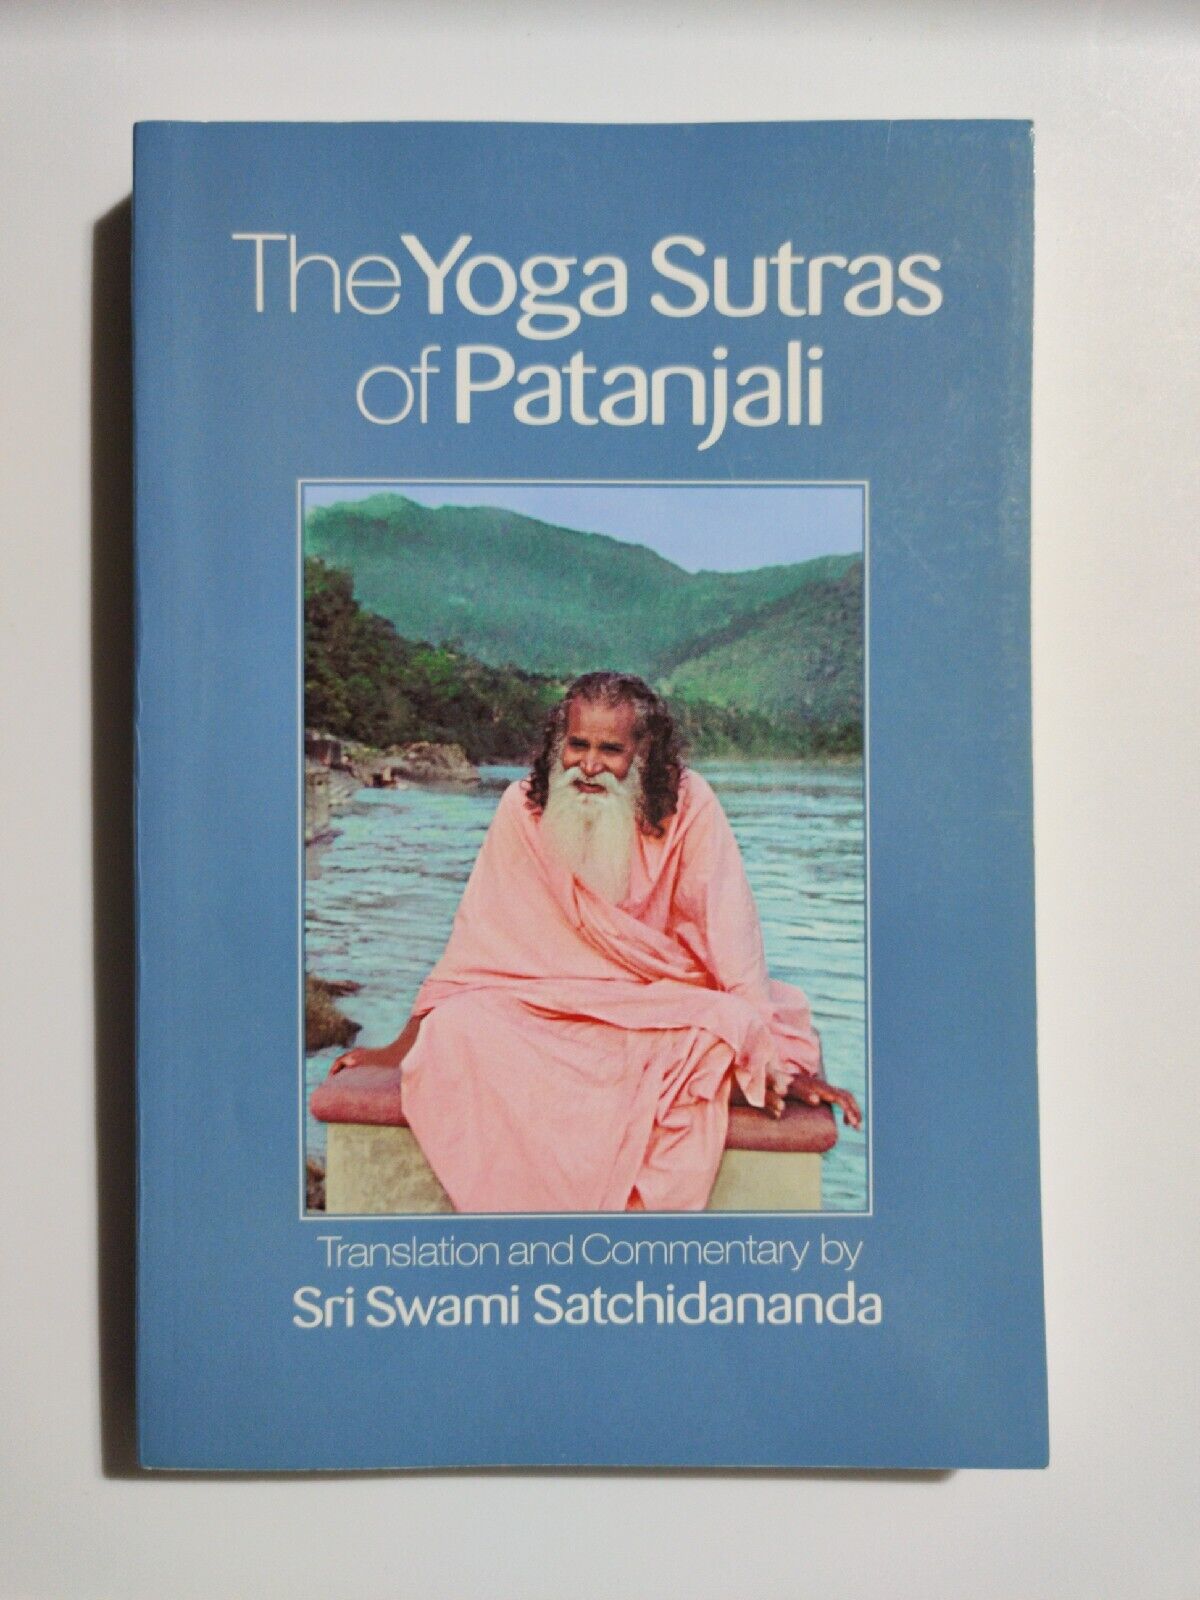 Yoga Sutras of Patanjali by Swami Satchidananda (2012, Trade Paperback)